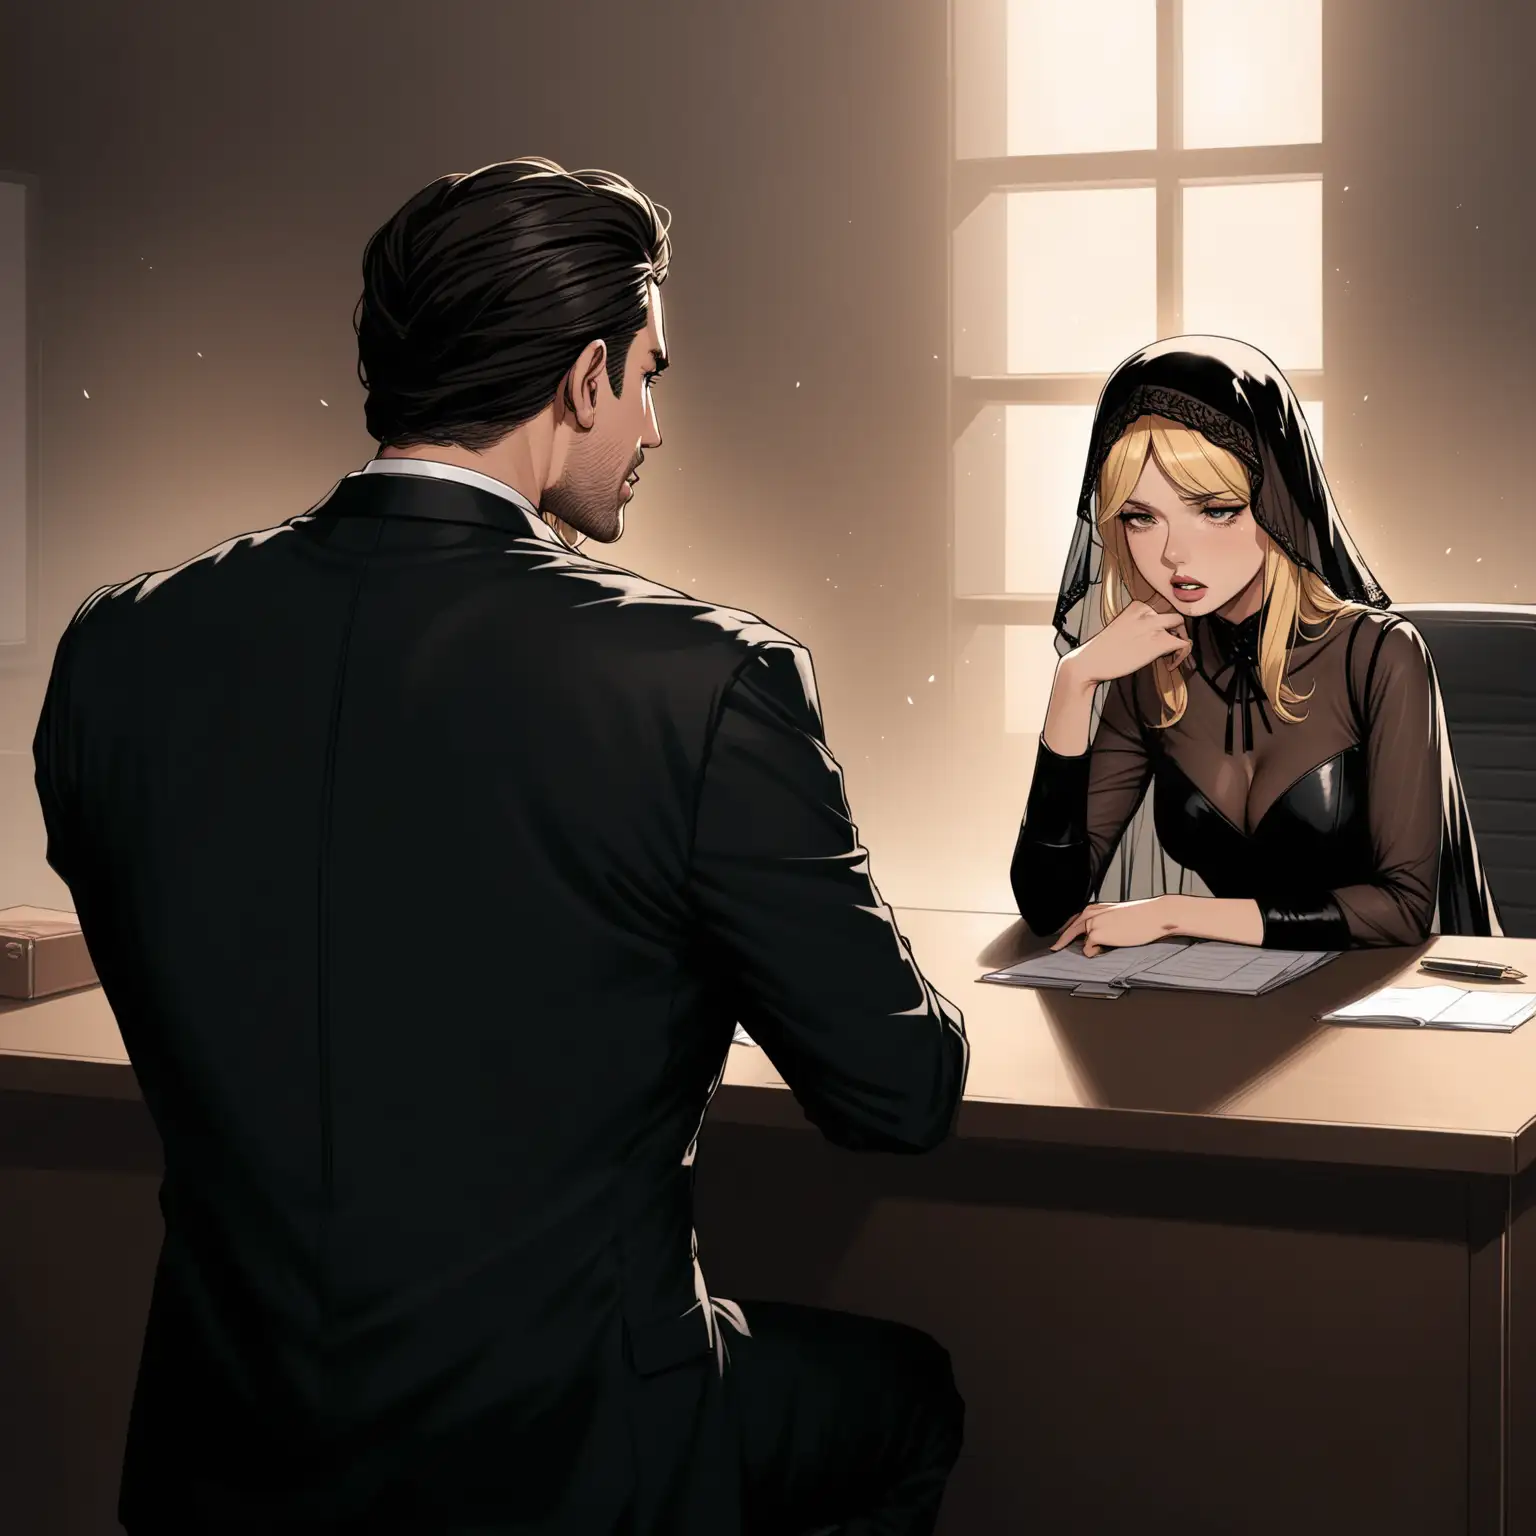 Mysterious Interrogation Tense Encounter Between a Blonde Woman and a Man in Black